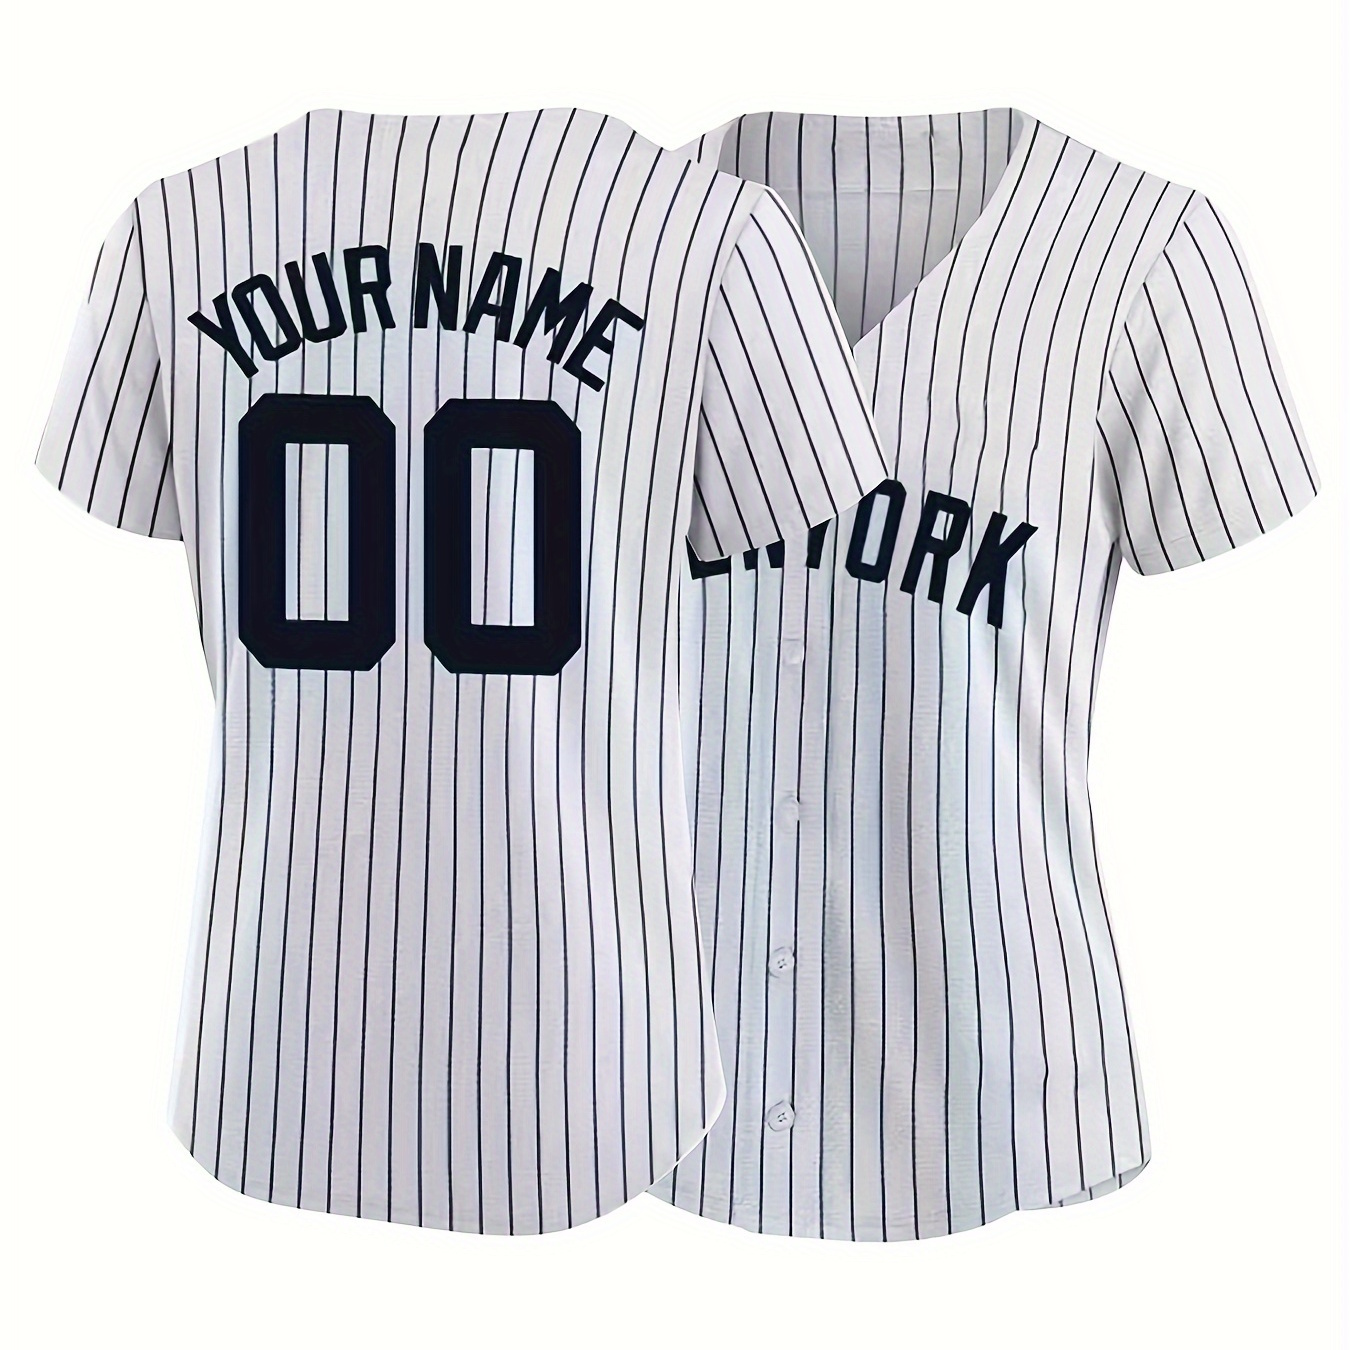 

Customizable Women's Baseball Jersey, Custom Name And Number, Embroidered Letters, Soft Fabric, Button Closure, V-neck Design, Athletic Style, Stripe Print